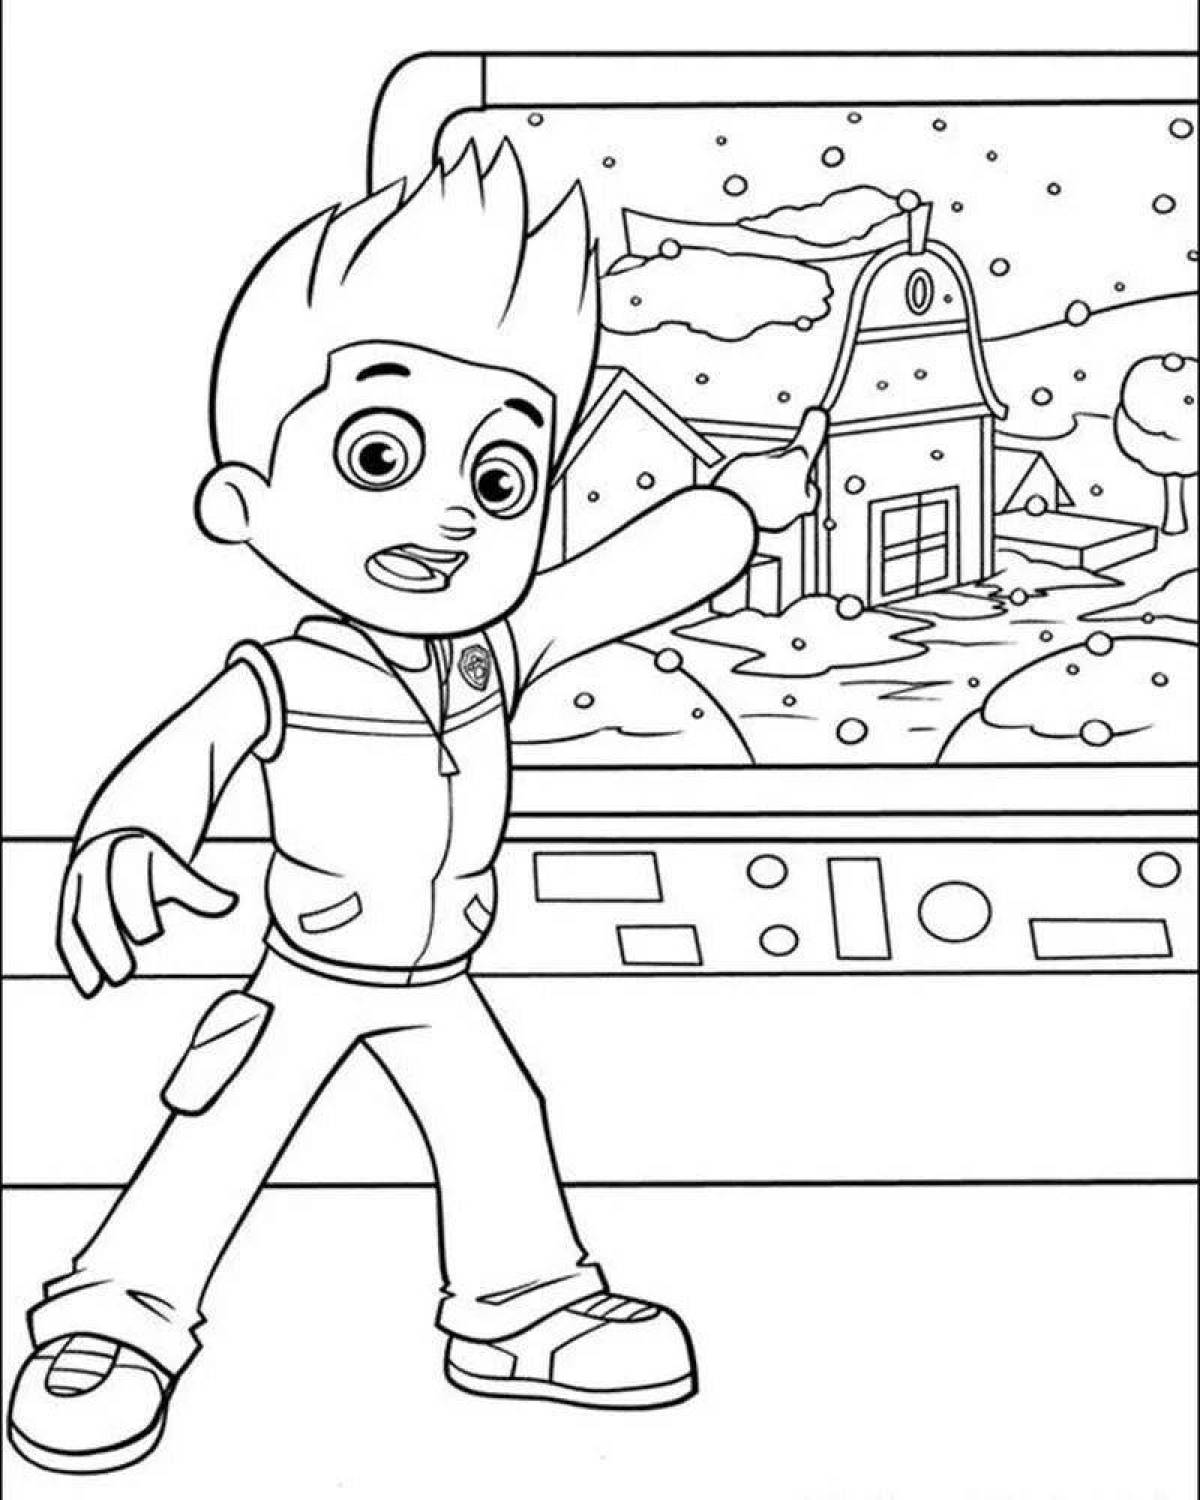 Coloring page nice rider